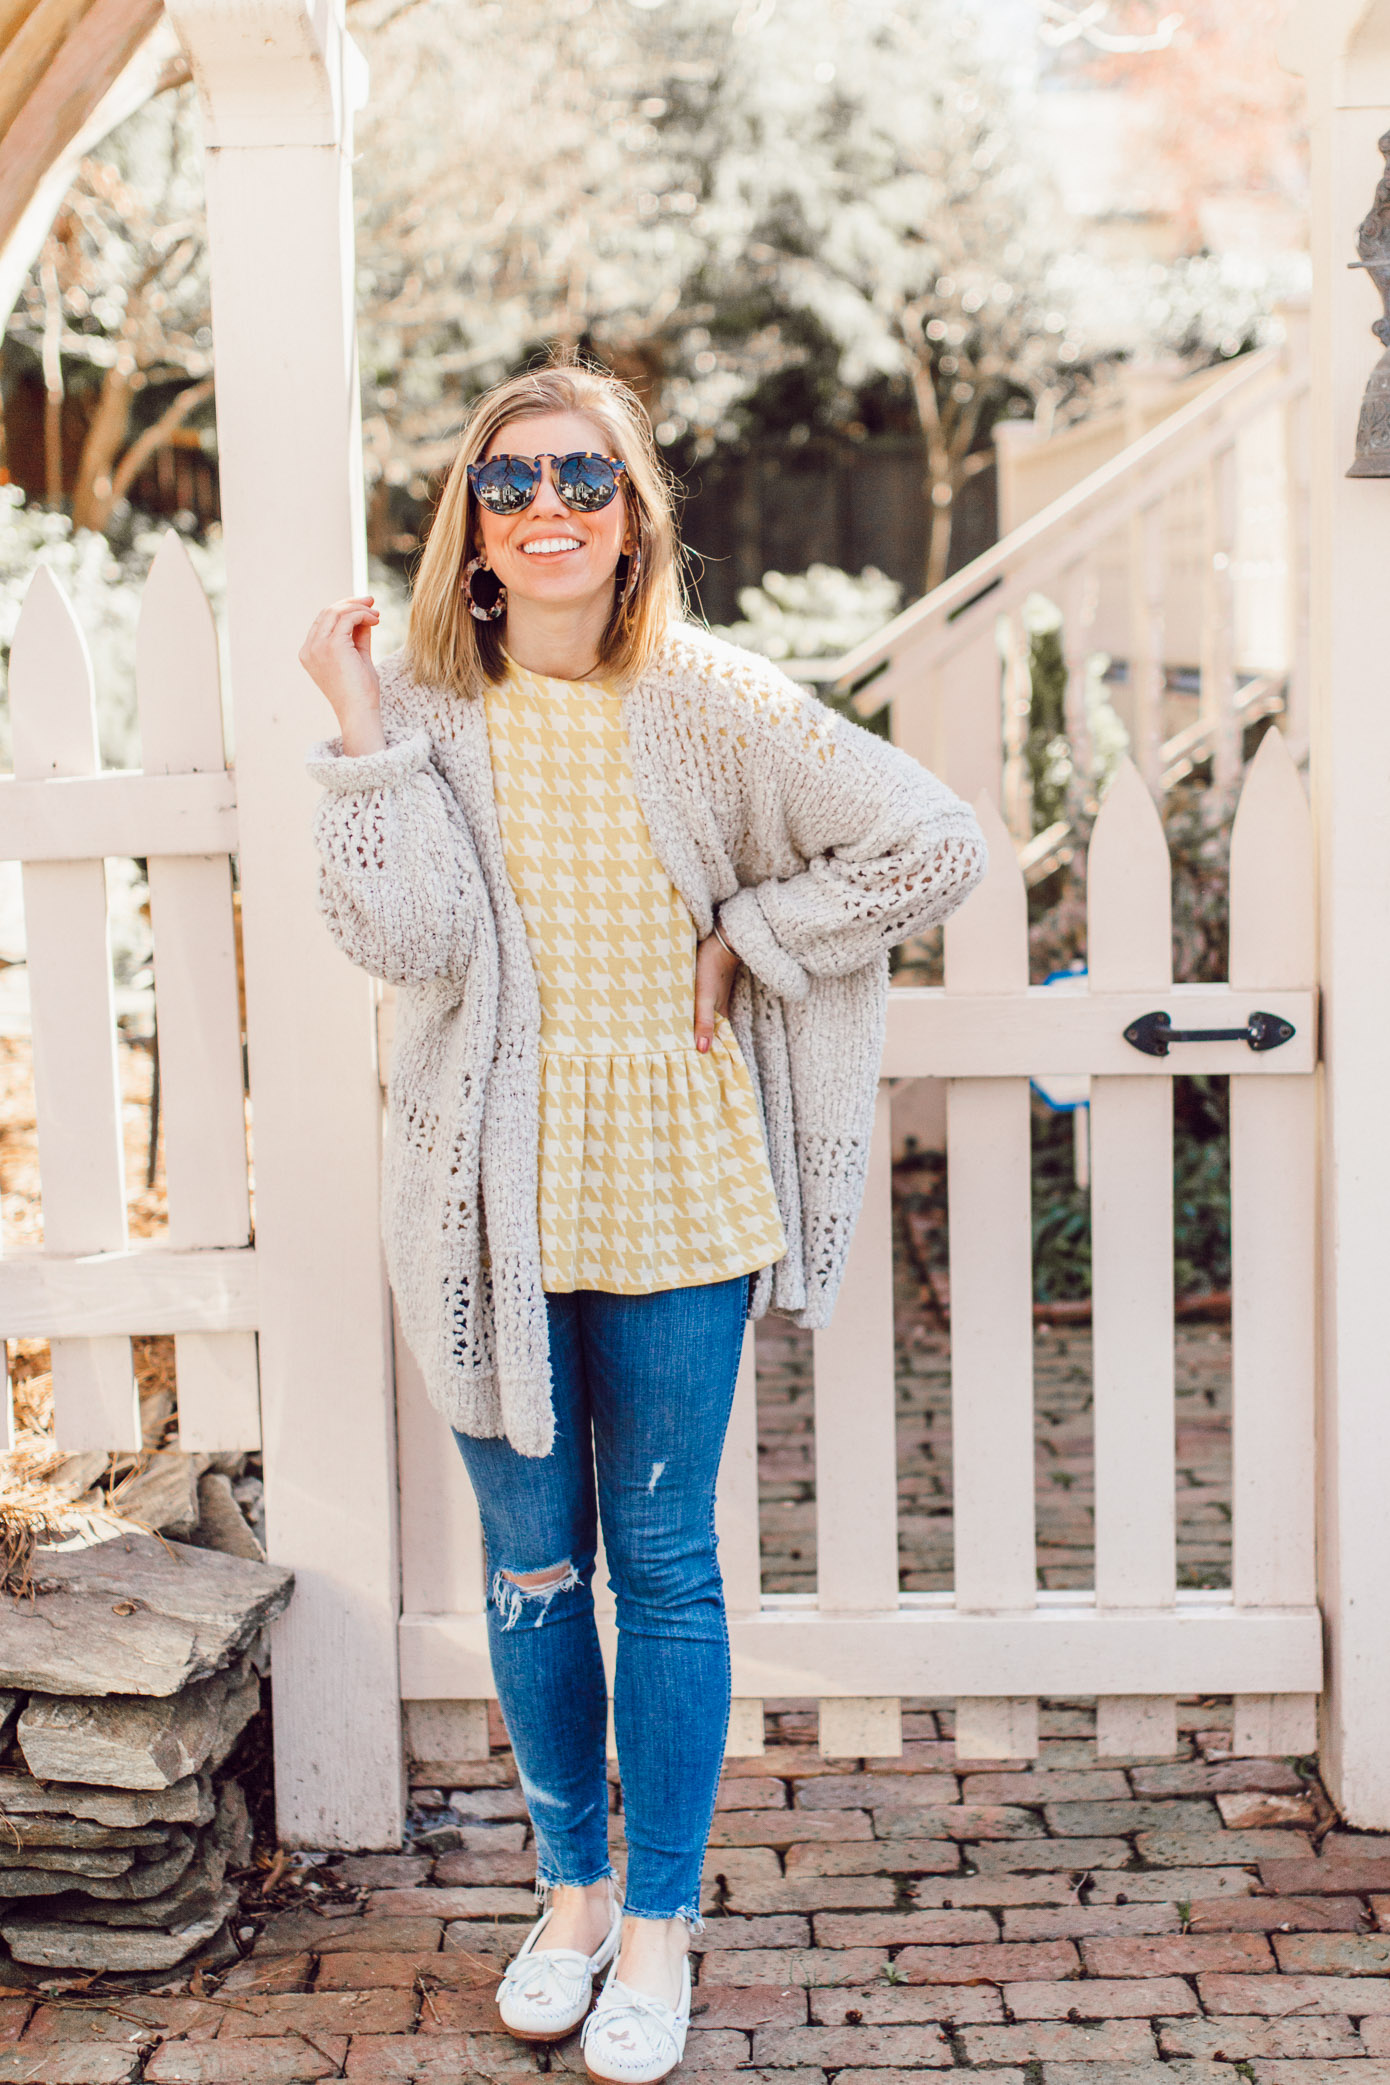 Spring 2019 Trend: Yellow | Yellow Jacquard Top, Crochet Sweater, High-rise Skinny Jeans, White Moccasins styled on Louella Reese